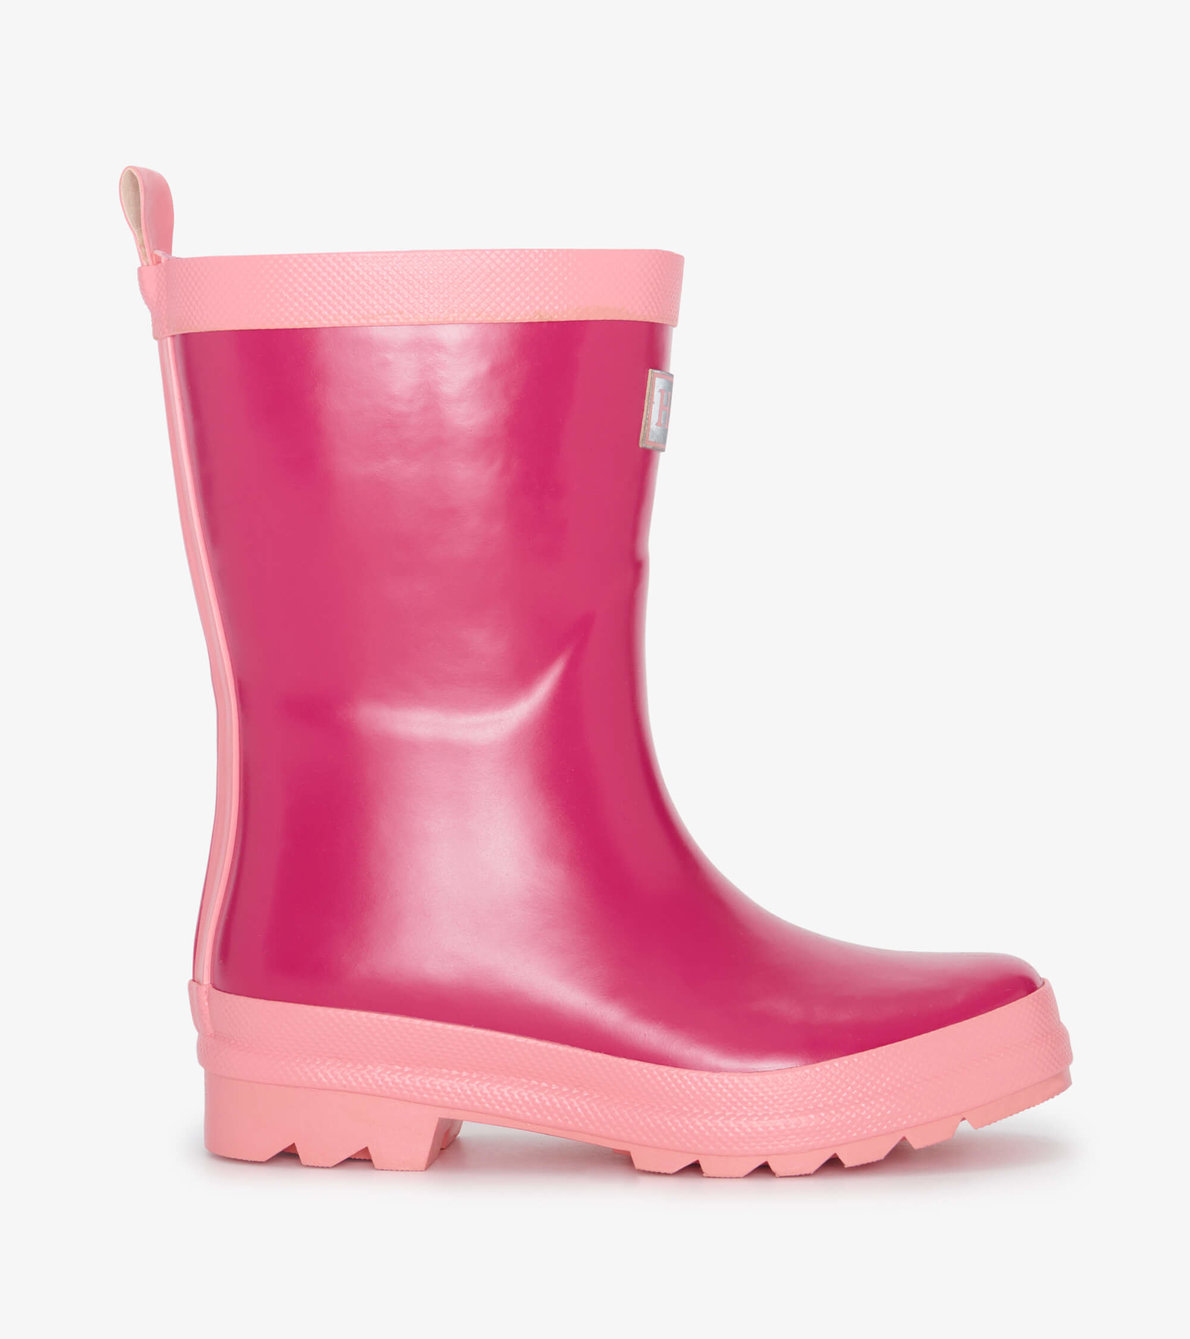 View larger image of Pink Shiny Wellies